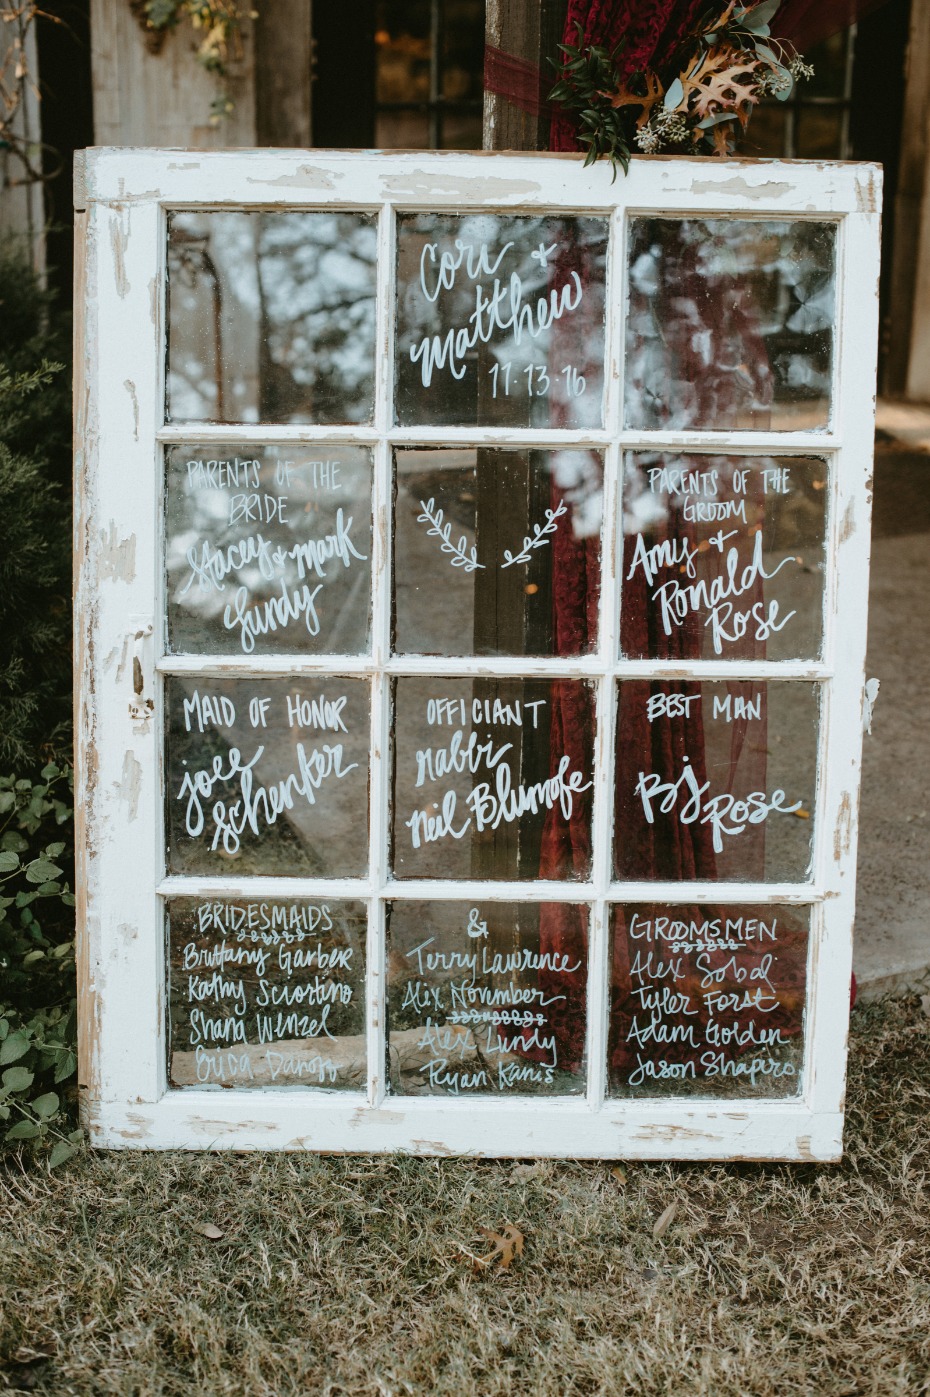 Use a vintage window to introduce your wedding party